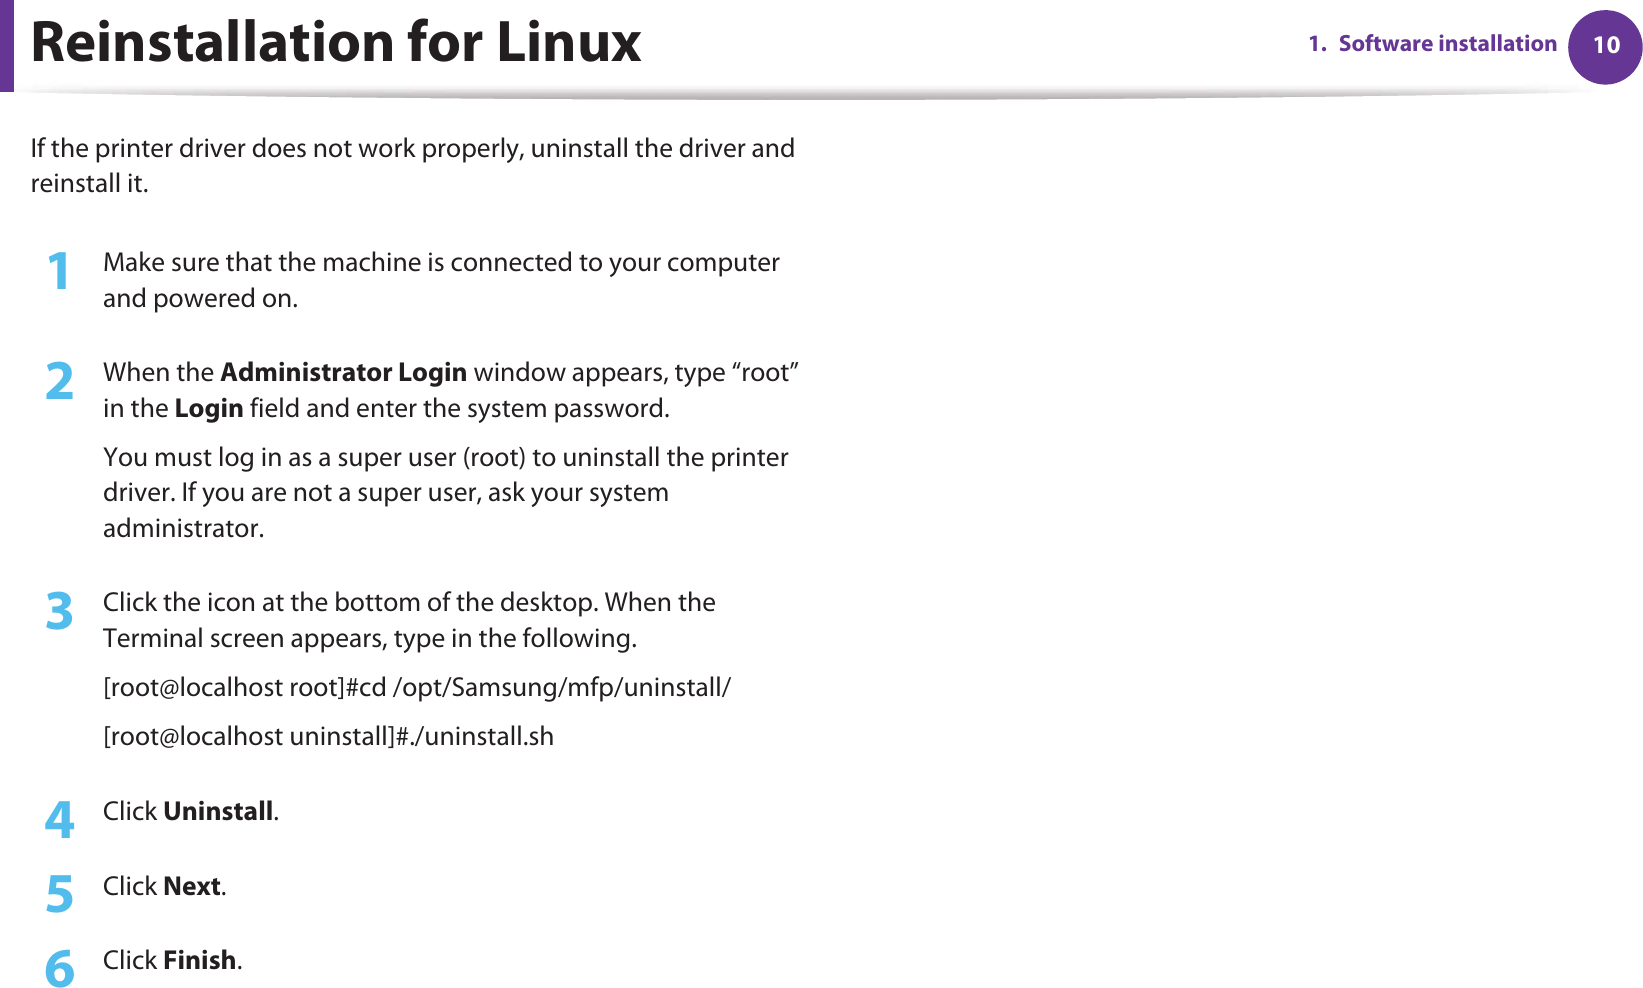 101. Software installationReinstallation for LinuxIf the printer driver does not work properly, uninstall the driver and reinstall it. 1Make sure that the machine is connected to your computer and powered on.2  When the Administrator Login window appears, type “root” in the Login field and enter the system password.You must log in as a super user (root) to uninstall the printer driver. If you are not a super user, ask your system administrator.3  Click the icon at the bottom of the desktop. When the Terminal screen appears, type in the following.[root@localhost root]#cd /opt/Samsung/mfp/uninstall/[root@localhost uninstall]#./uninstall.sh4  Click Uninstall.5  Click Next. 6  Click Finish.